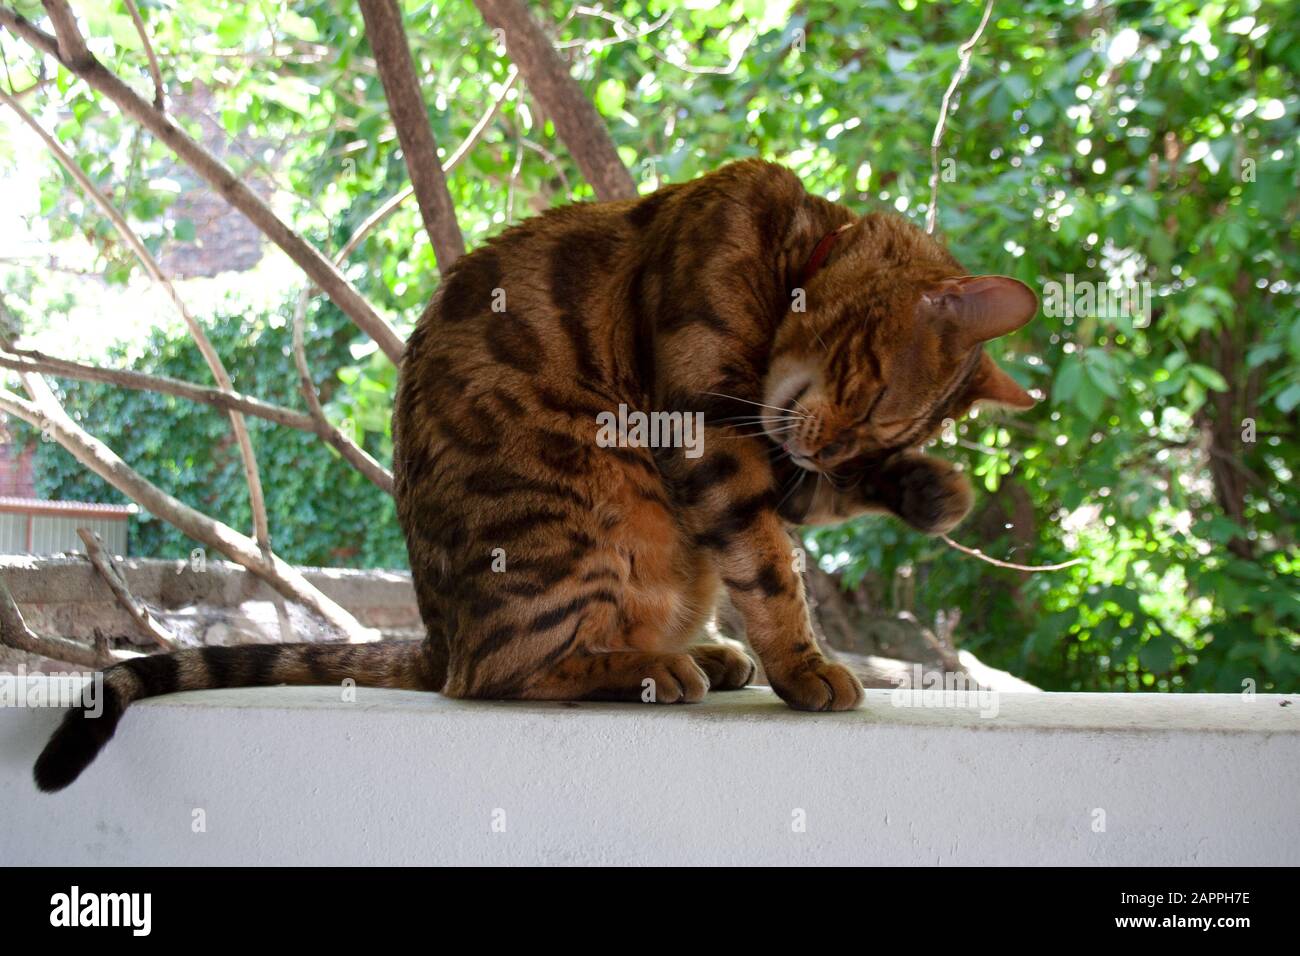 Striped brown Bengal cat licking itself in the backyard garden Stock Photo